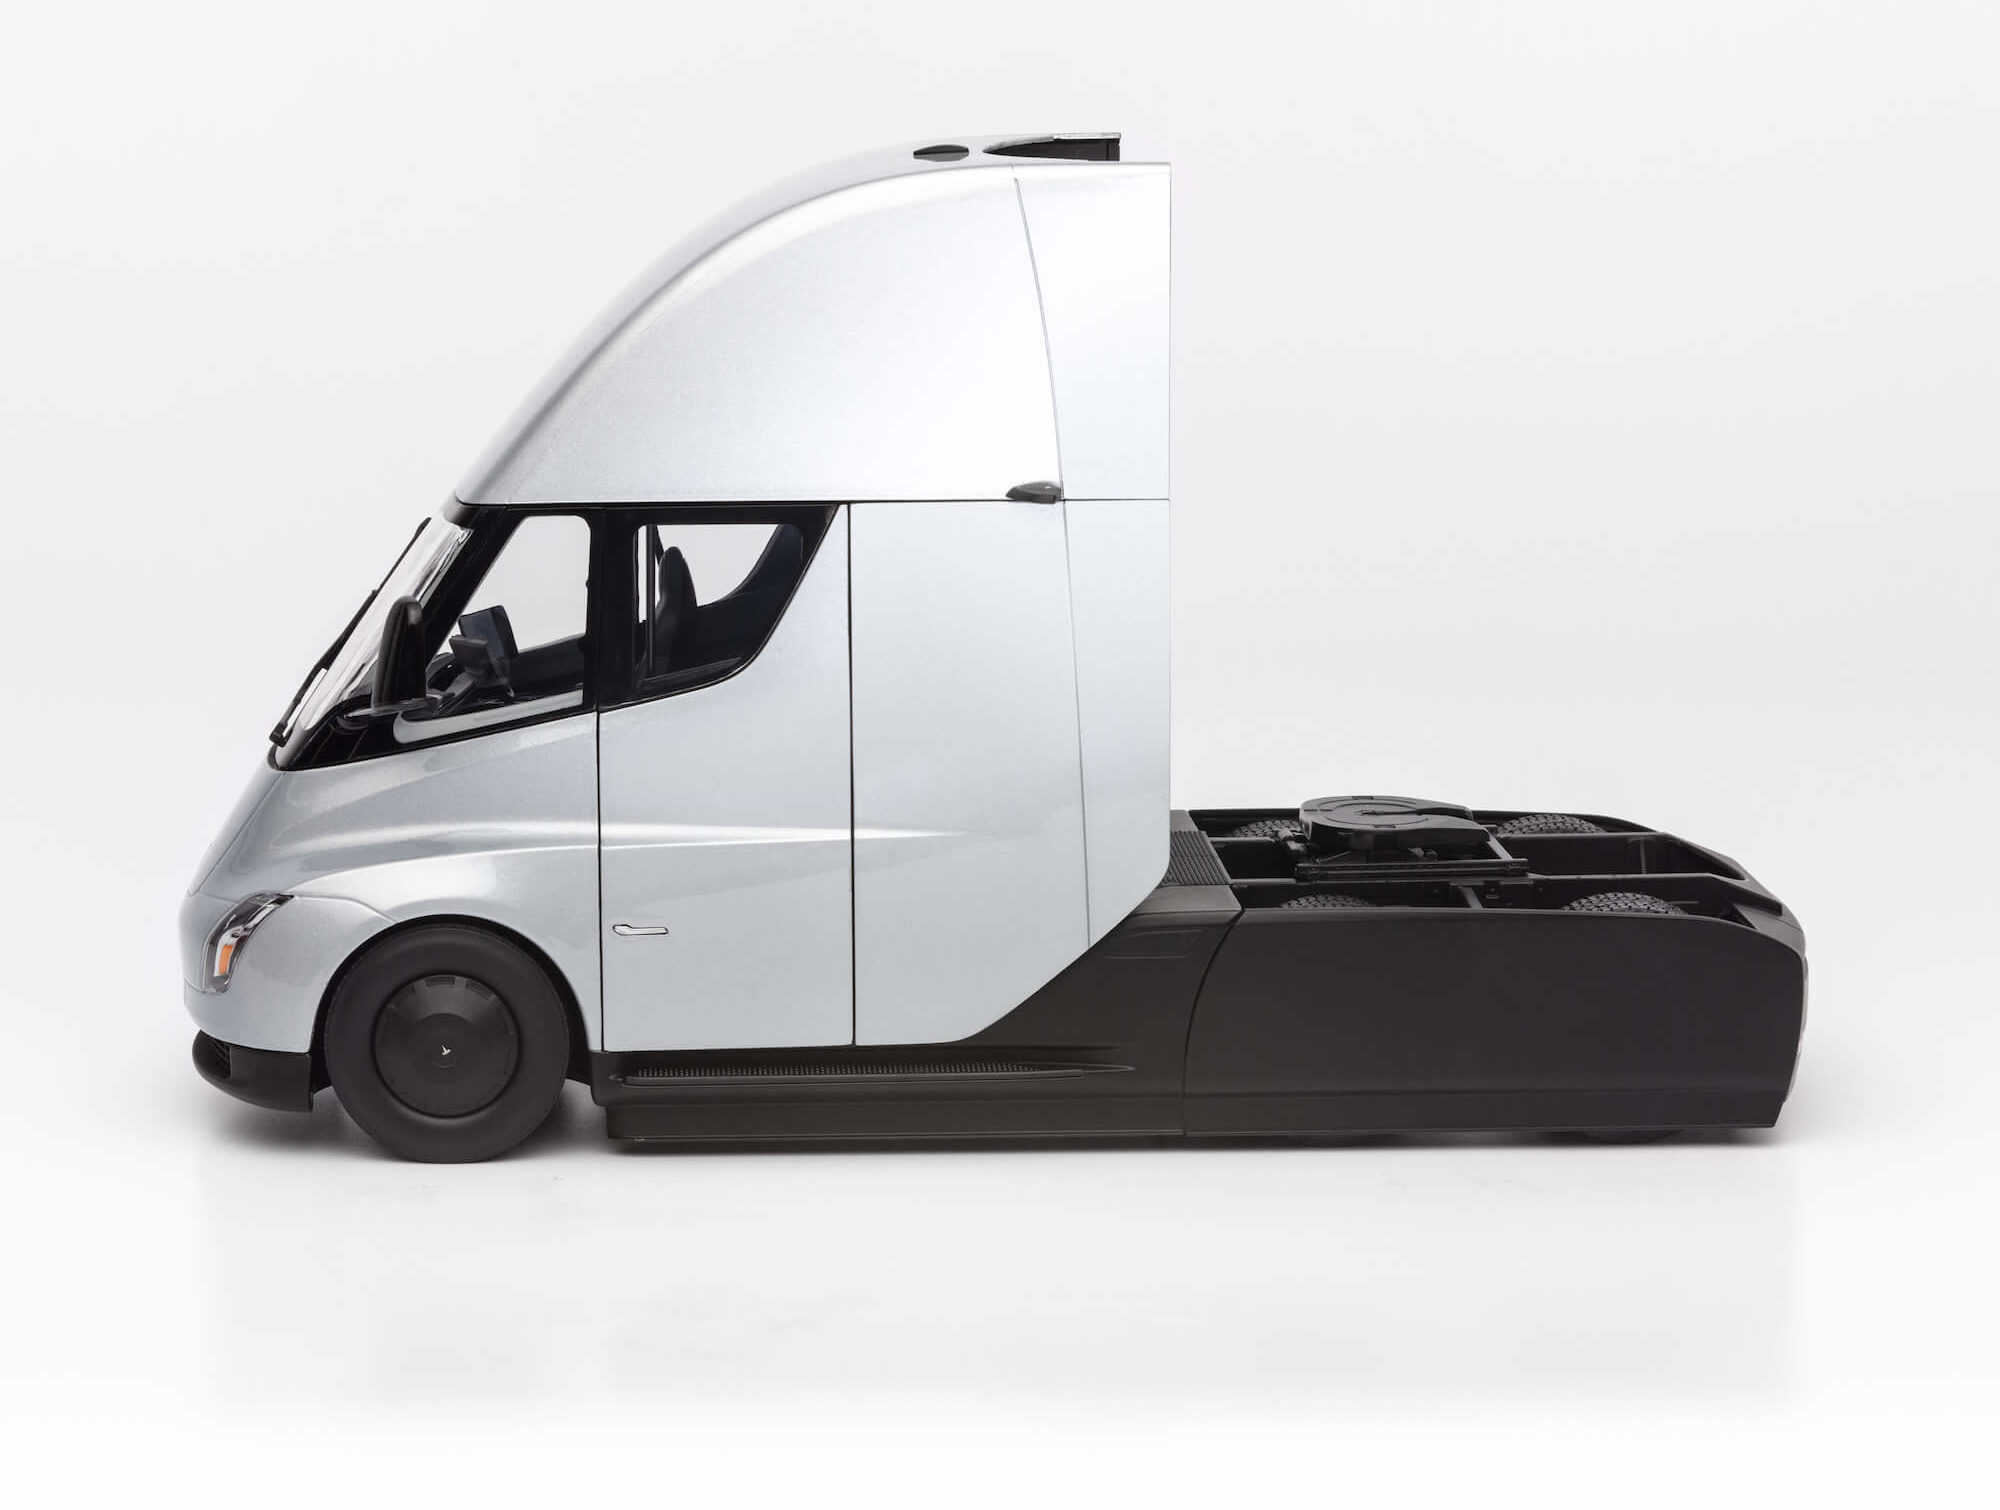 Tesla adds Semi truck diecast toy in 1:24 scale to its online store